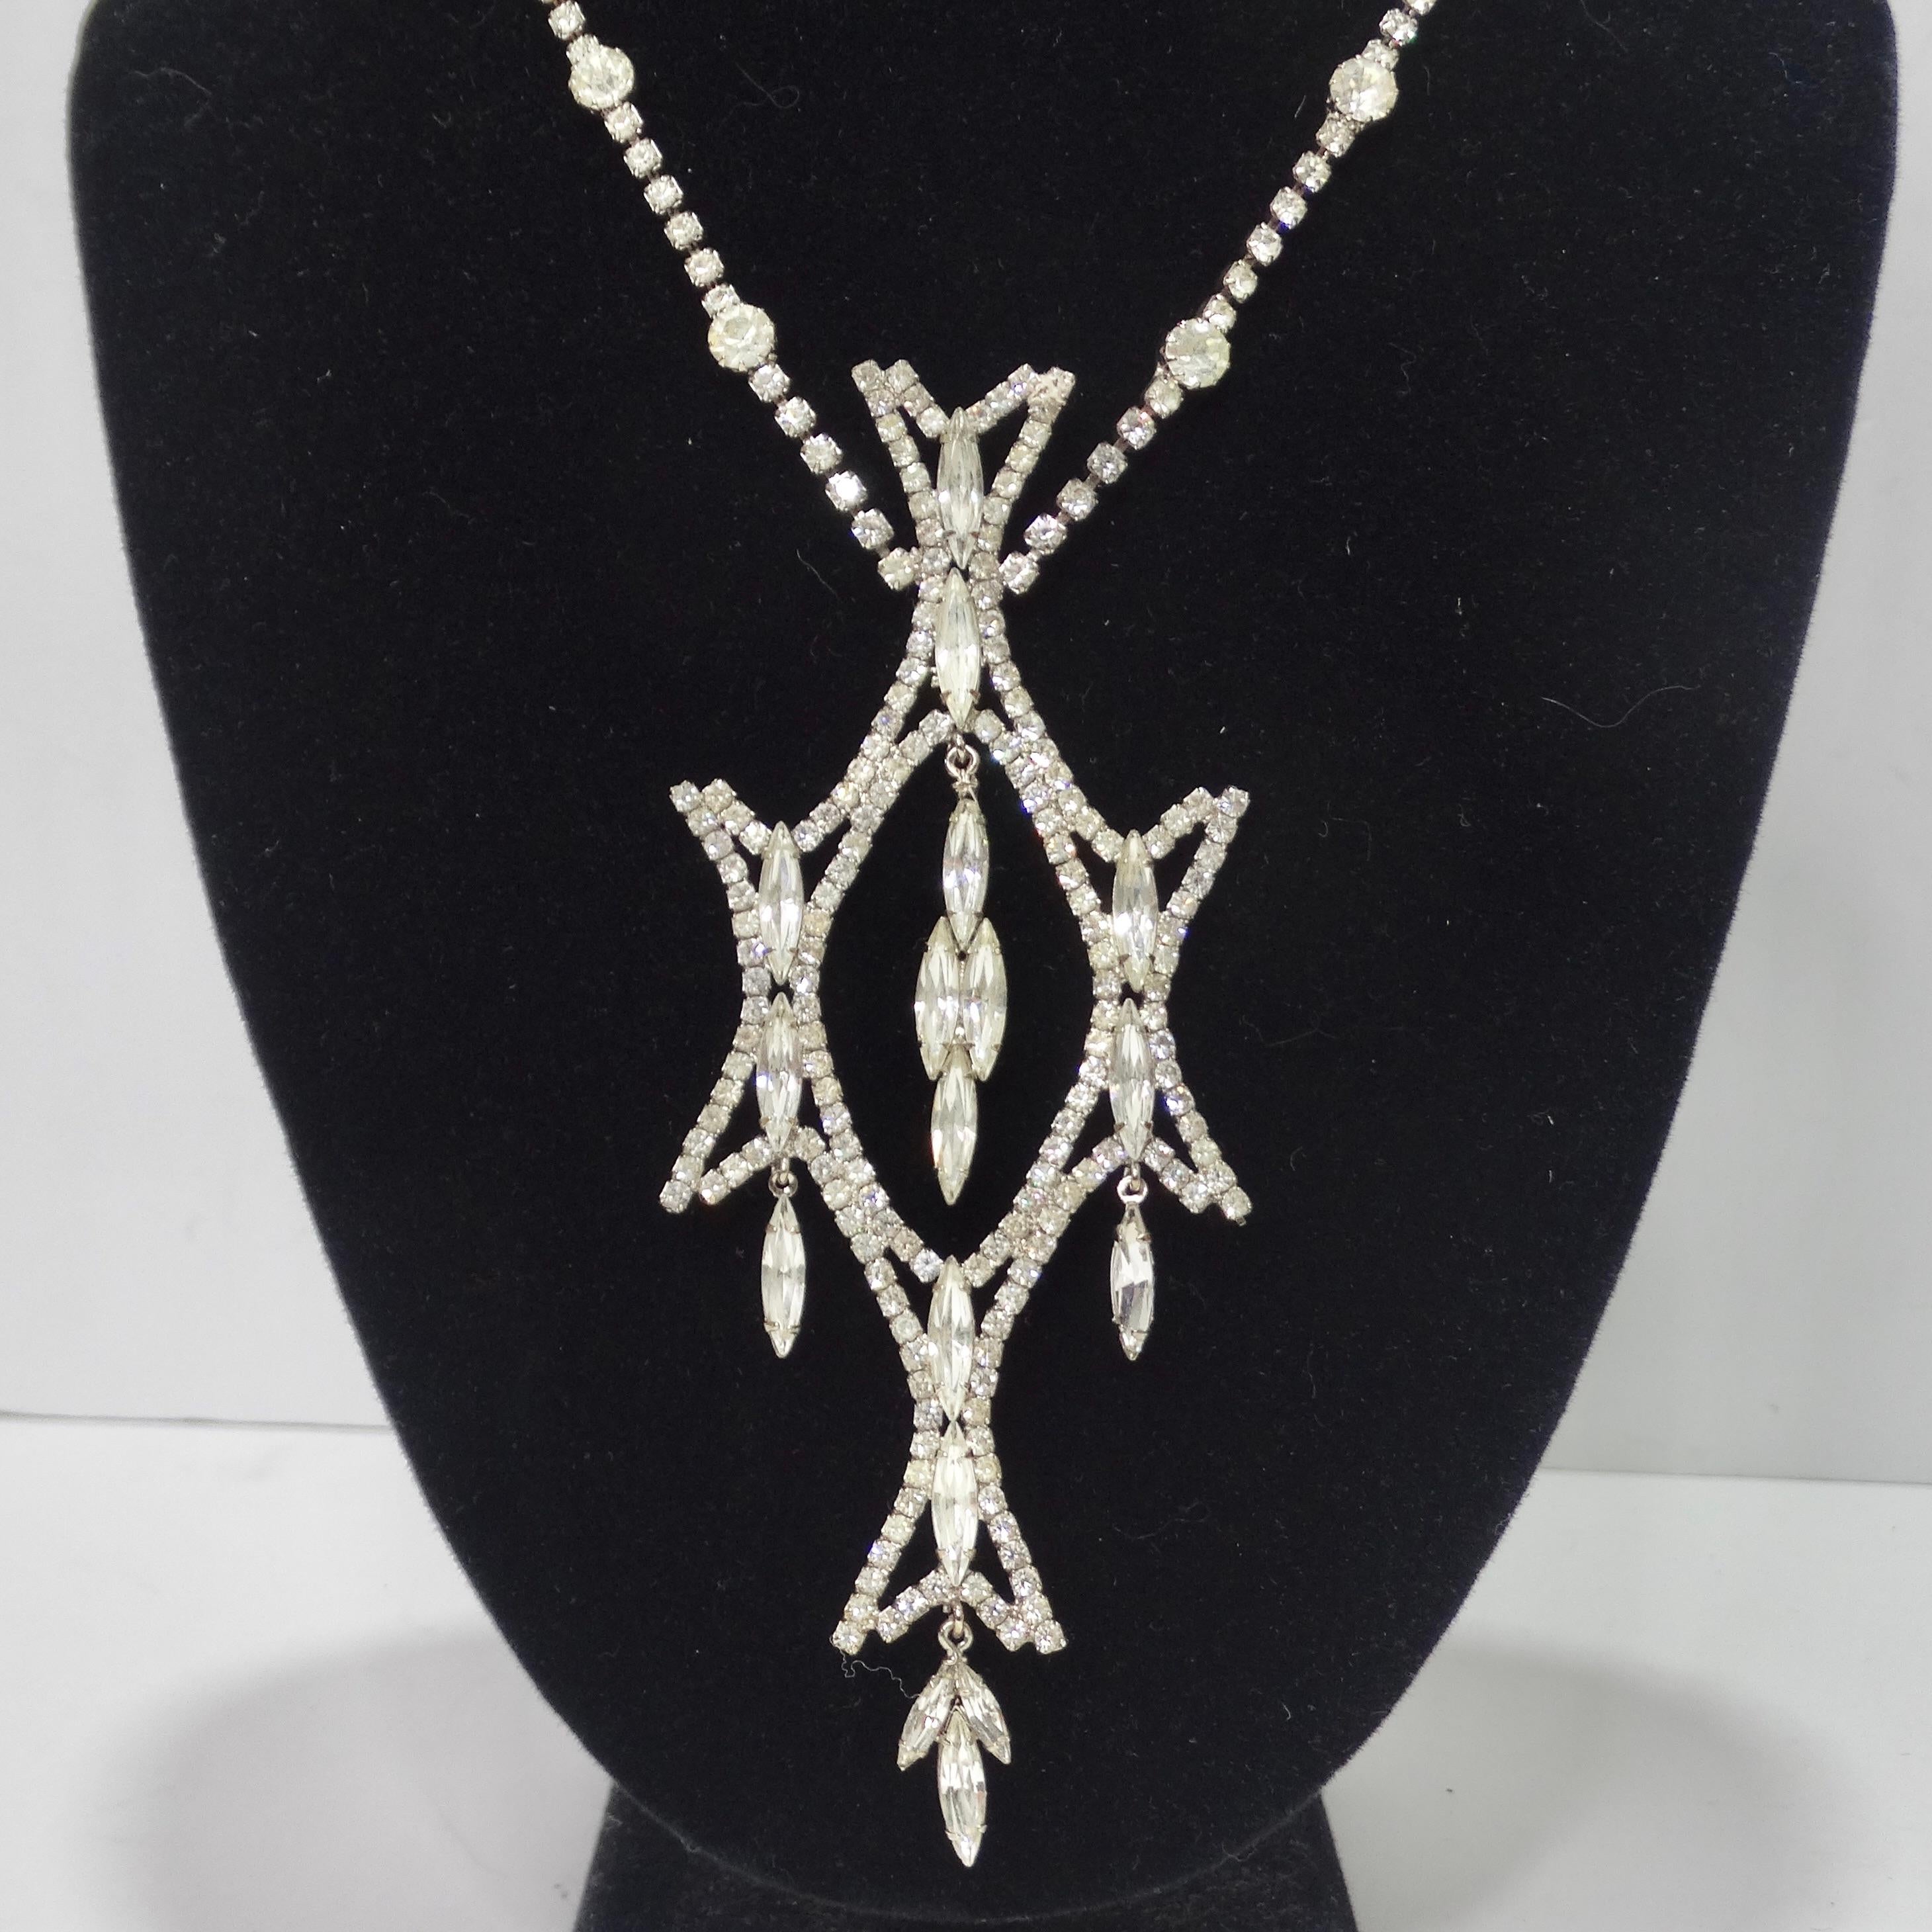 Calling all vintage jewelry lovers! This statement rhinestone necklace is begging to be added to your collection! This necklace is simply mesmerizing, the arrangement of all of the rhinestones is so intricate and comes together to create the most